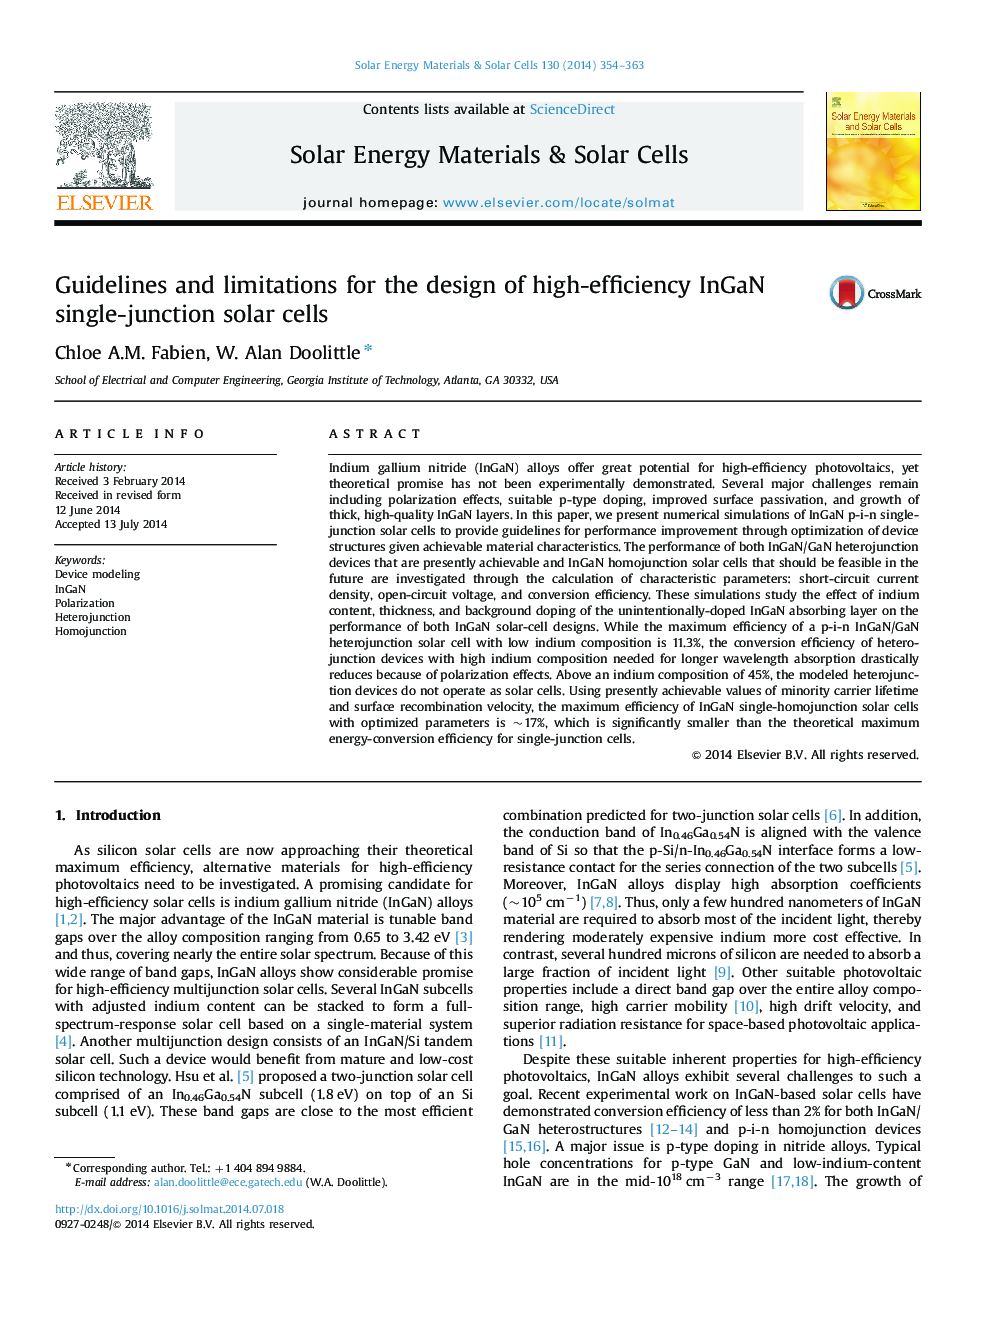 Guidelines and limitations for the design of high-efficiency InGaN single-junction solar cells